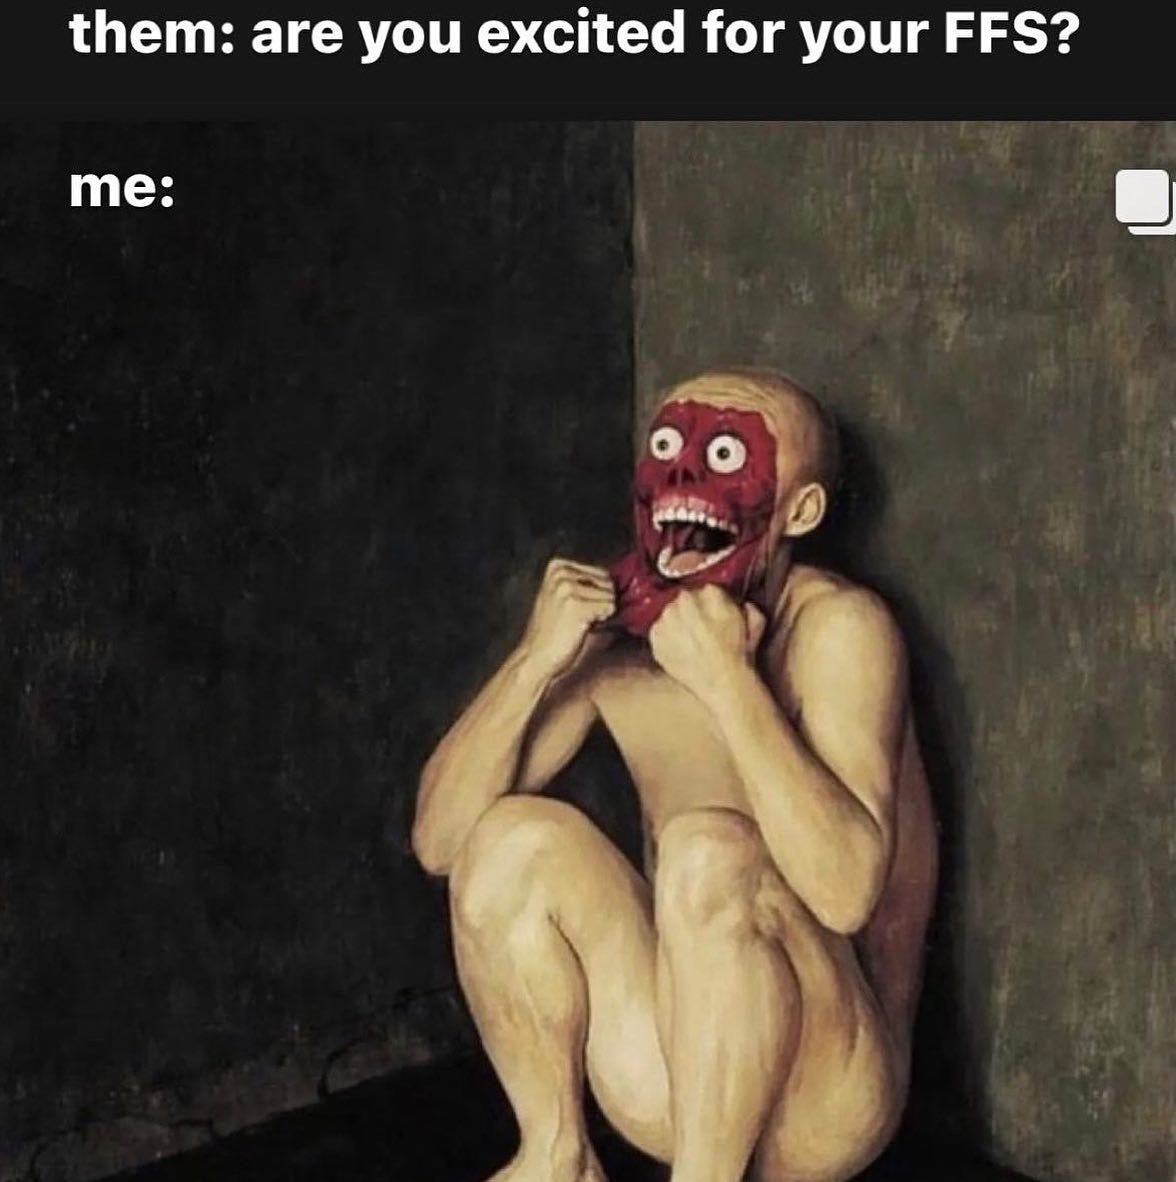 Meme that says "them: are you excited for your FFS?" next line says "me:" then it has an oil painting of a naked, screaming man who is peeling the skin off his face. 